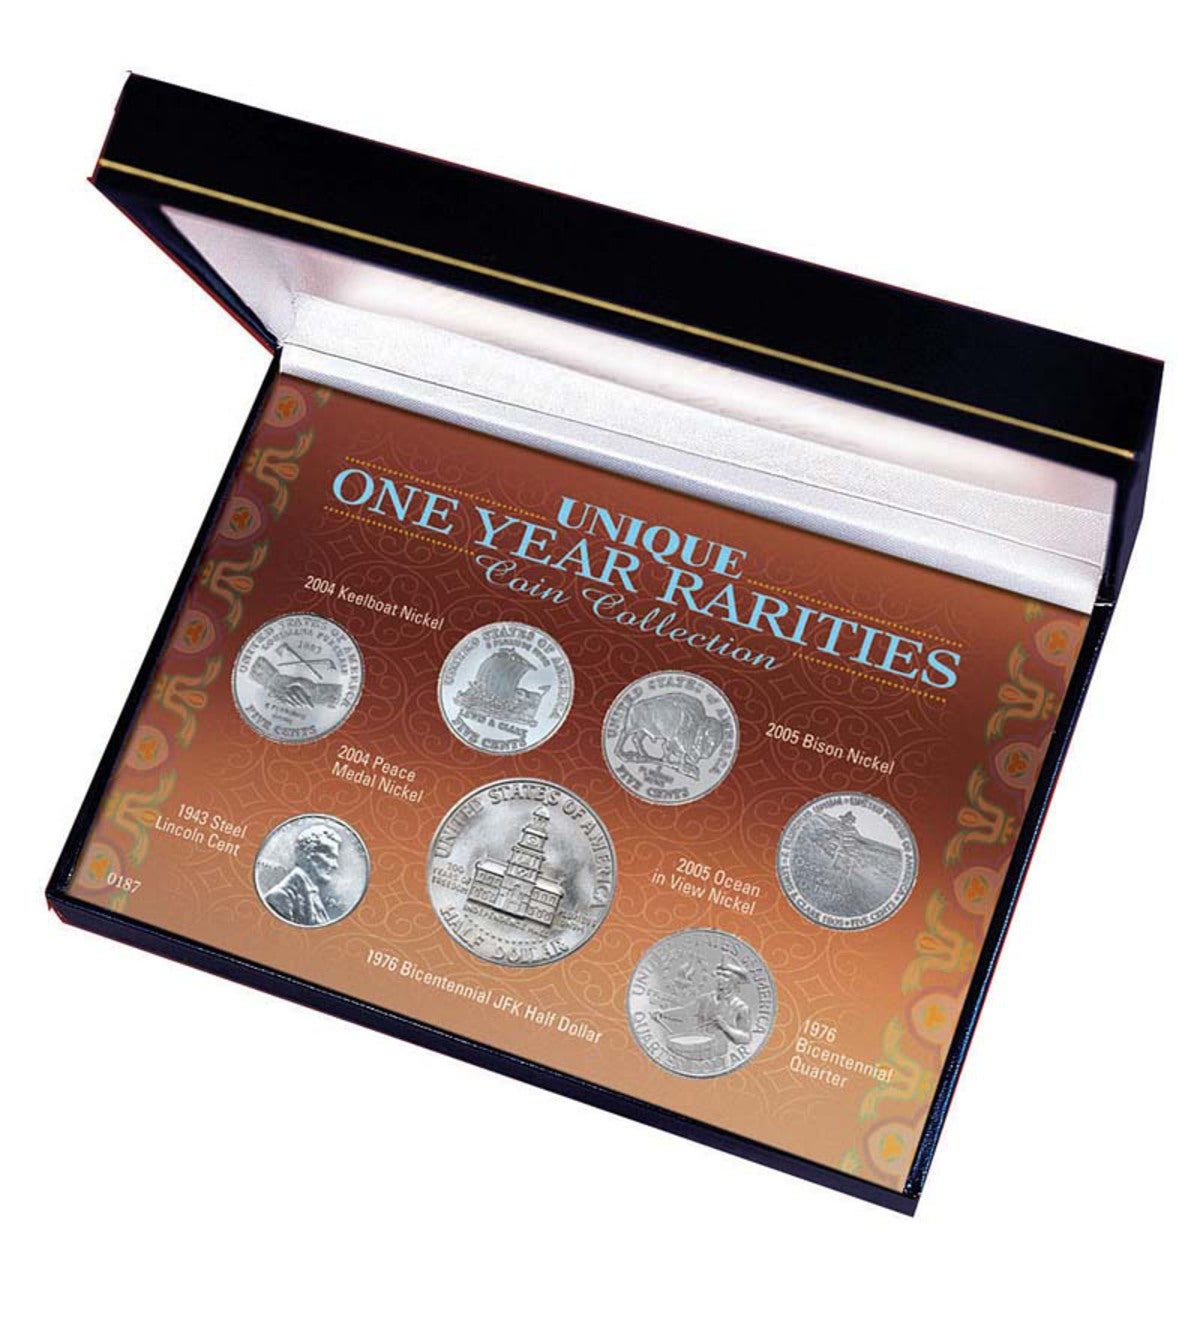 Collectable Unique One Year Coin Rarities Boxed Set | Wind and Weather